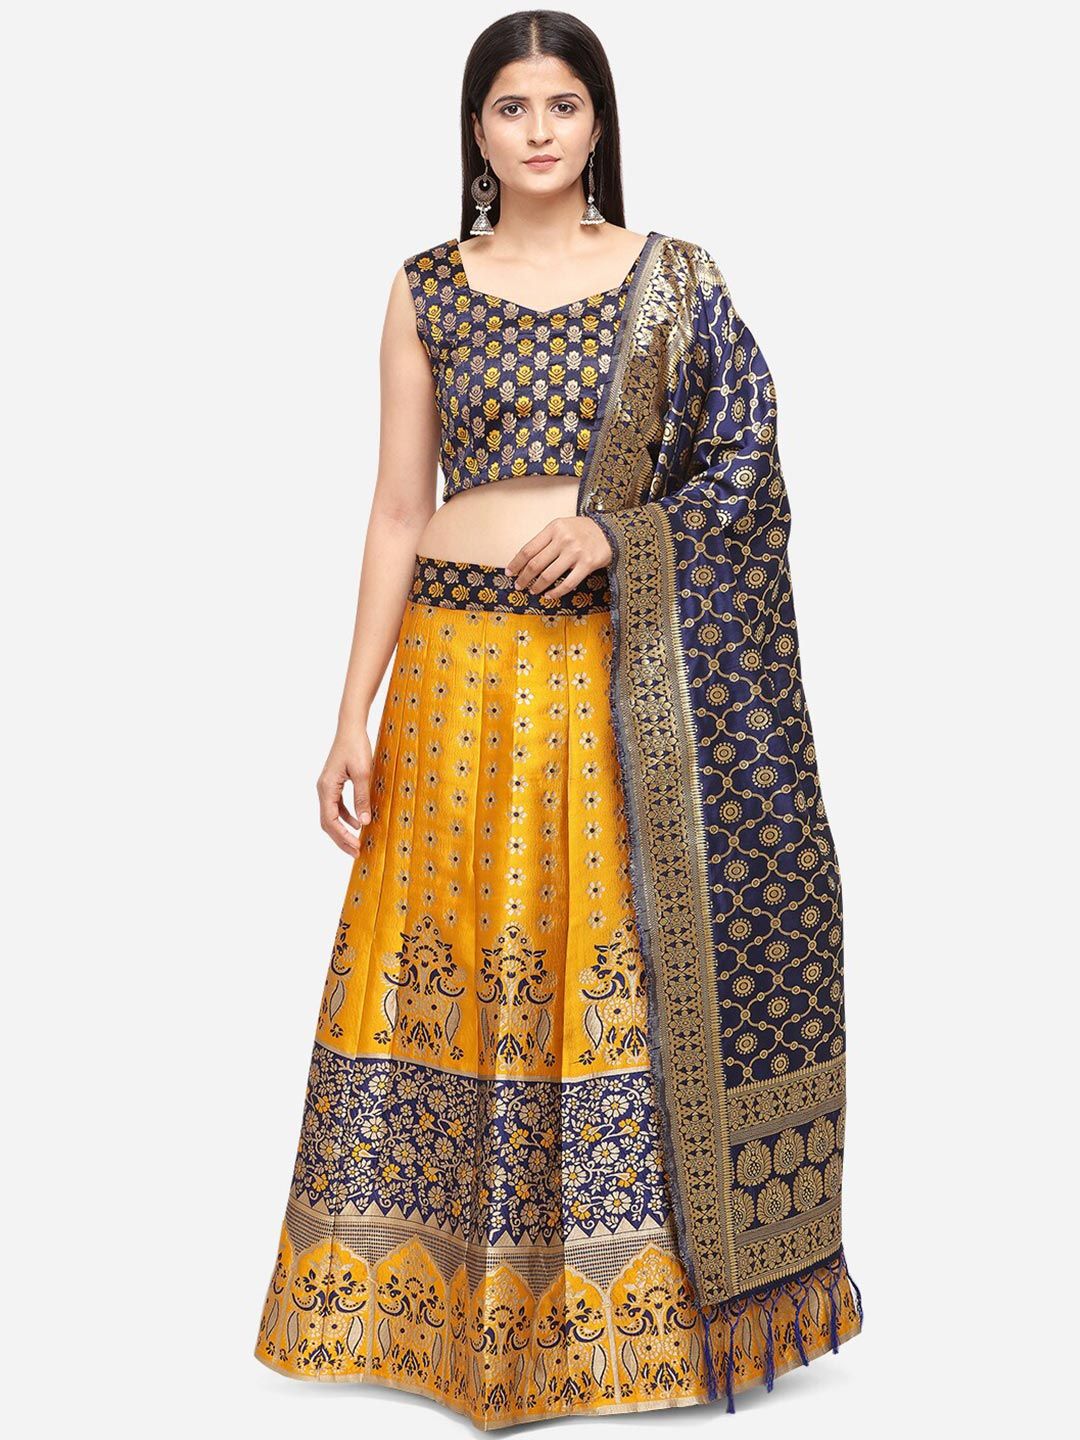 VRSALES Mustard & Navy Blue Semi-Stitched Lehenga & Unstitched Blouse With Dupatta Price in India